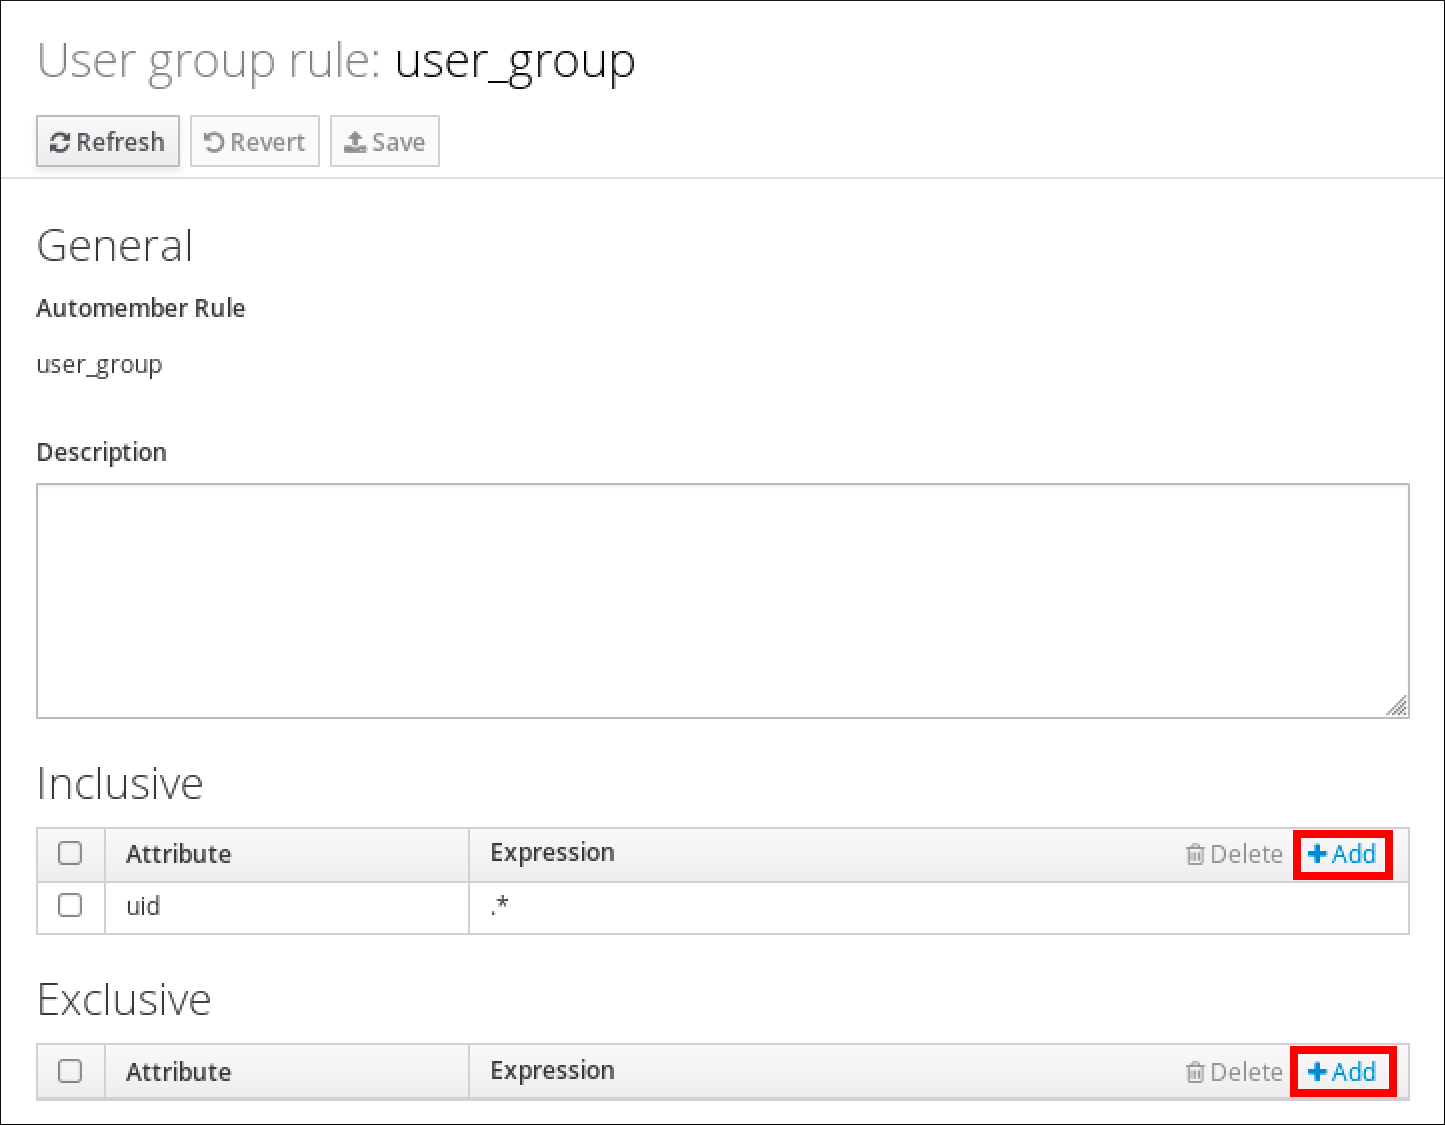 A screenshot of the User group rule page displaying attributes for the user_group rule. The "Inclusive" section has a table with an "Attribute" column and an "Expression" column with an entry for the Attribute "uid" and its Expression is ".*". At the bottom is the Exclusive section which also has a table with an Attribute column and an Expression column but it has no entries.